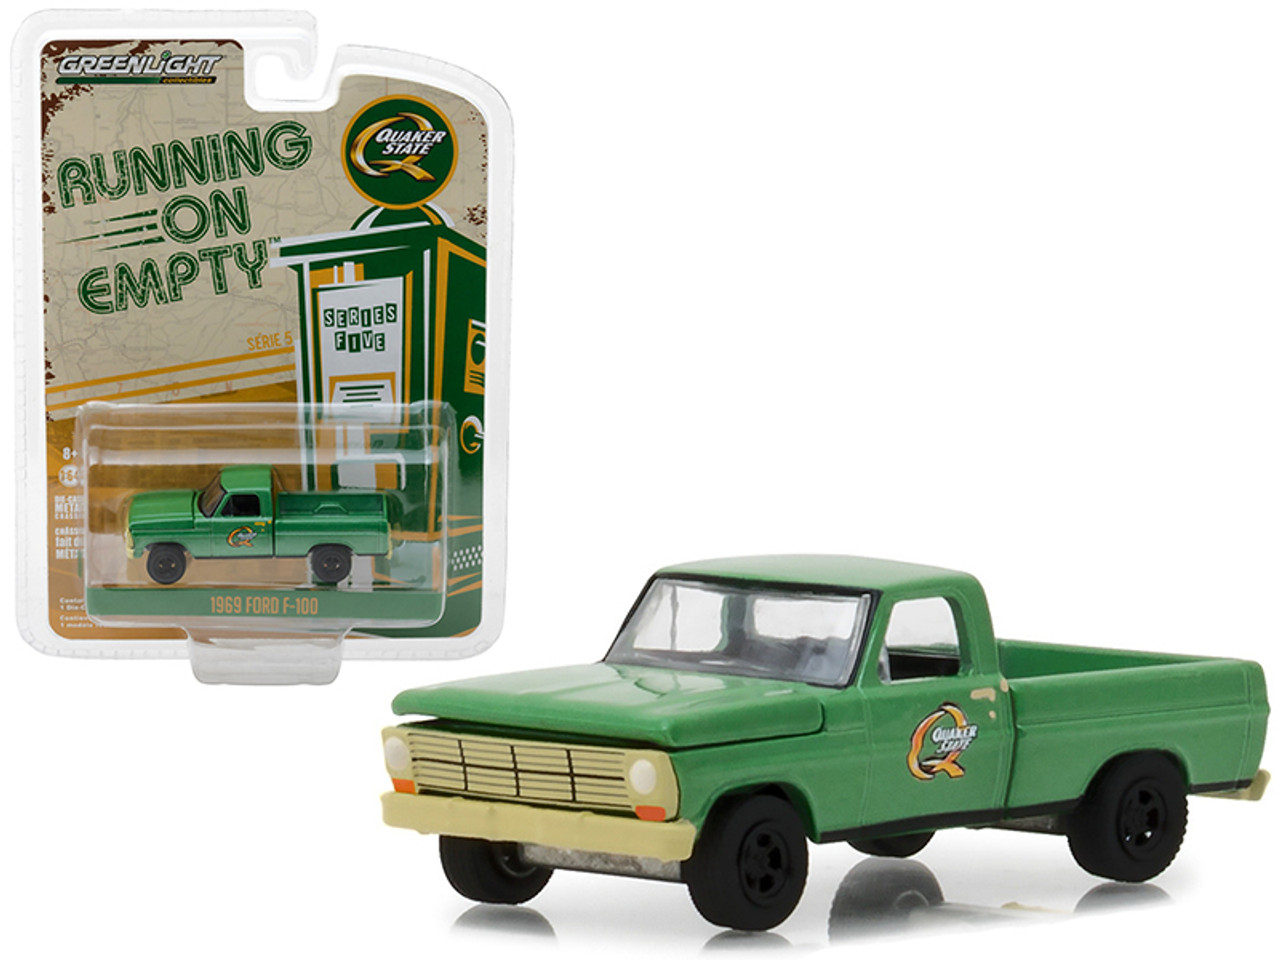 1969 Ford F-100 Pickup Truck "Quaker State" Green Running on Empty Series 5 1/64 Diecast Model Car by Greenlight